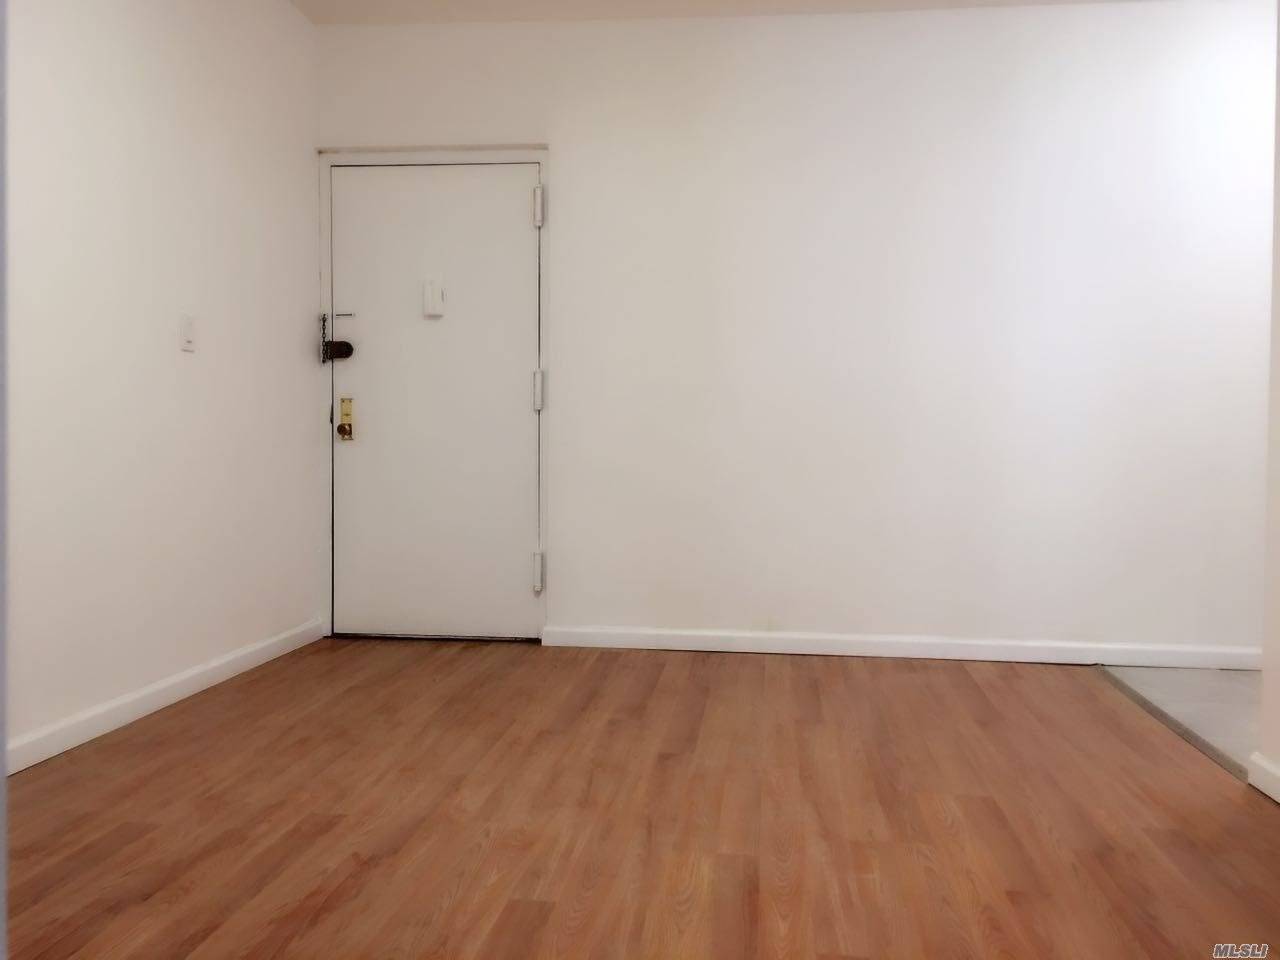 Sf Newly Renovated 2 Rooms 1 Bathoffice In The 2nd Floor Of A Multiple Family Building In Prime Flushing Location.